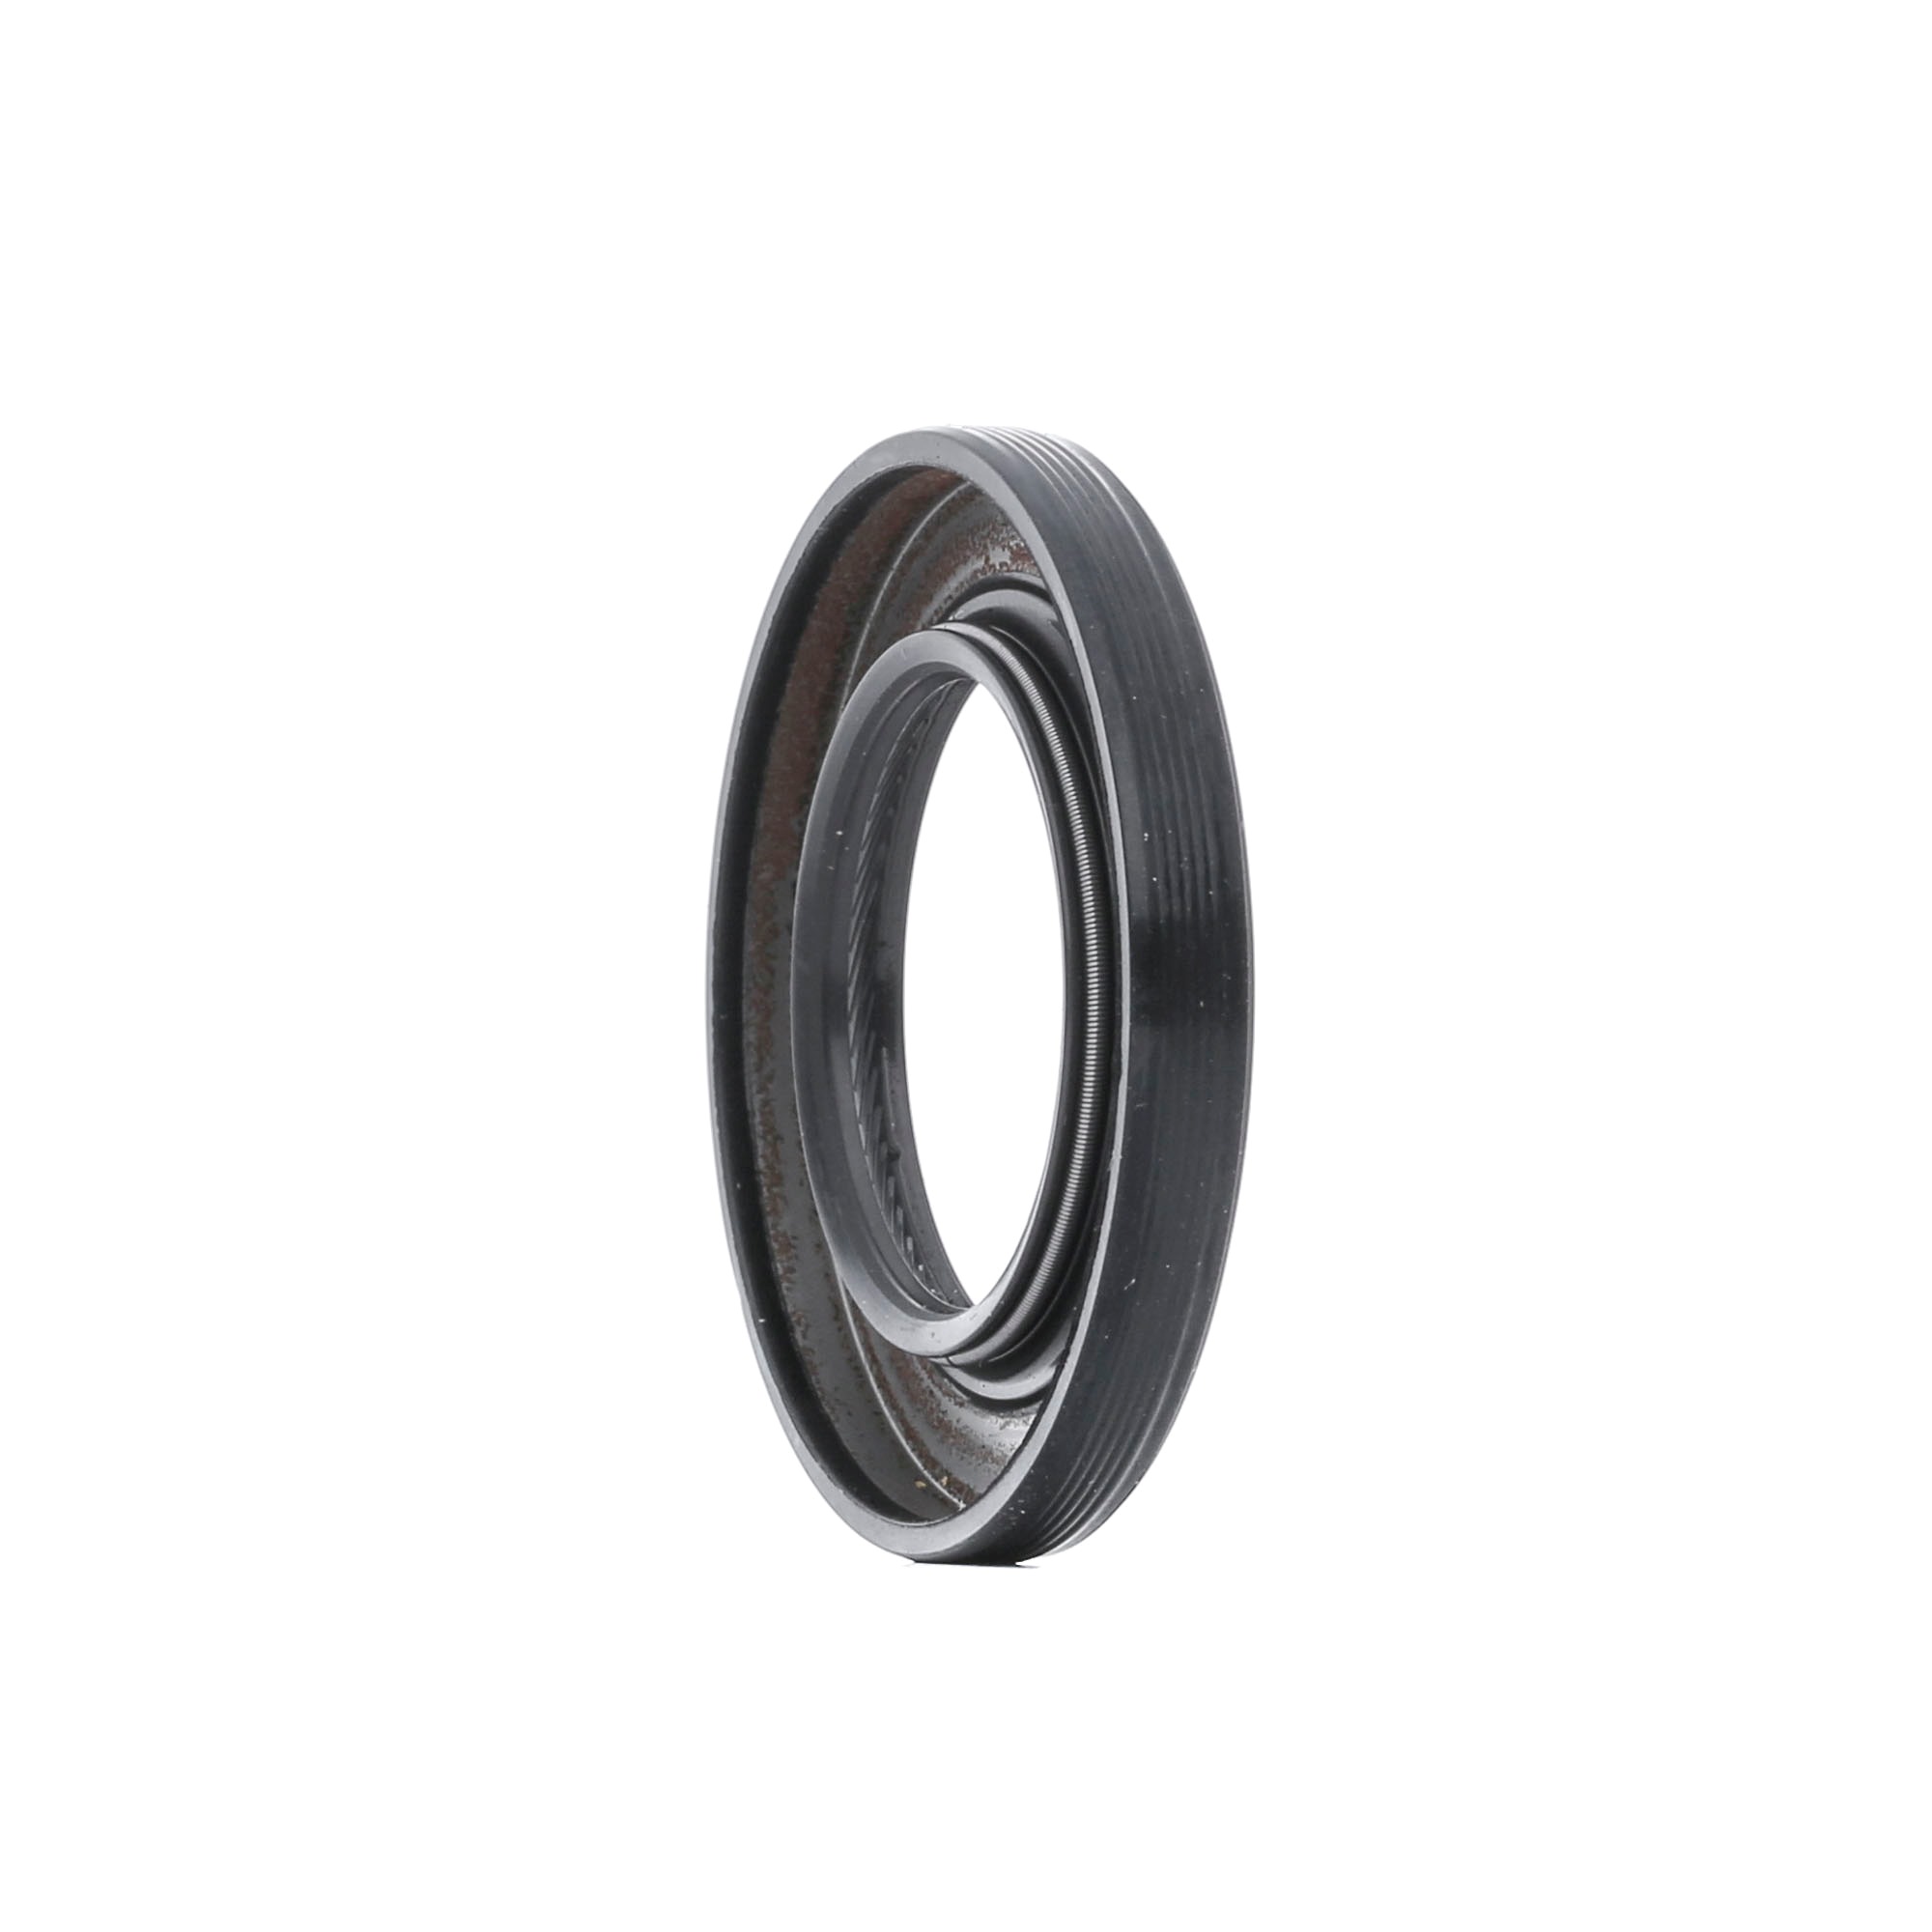 Opel Camshaft seal REINZ 81-34472-00 at a good price